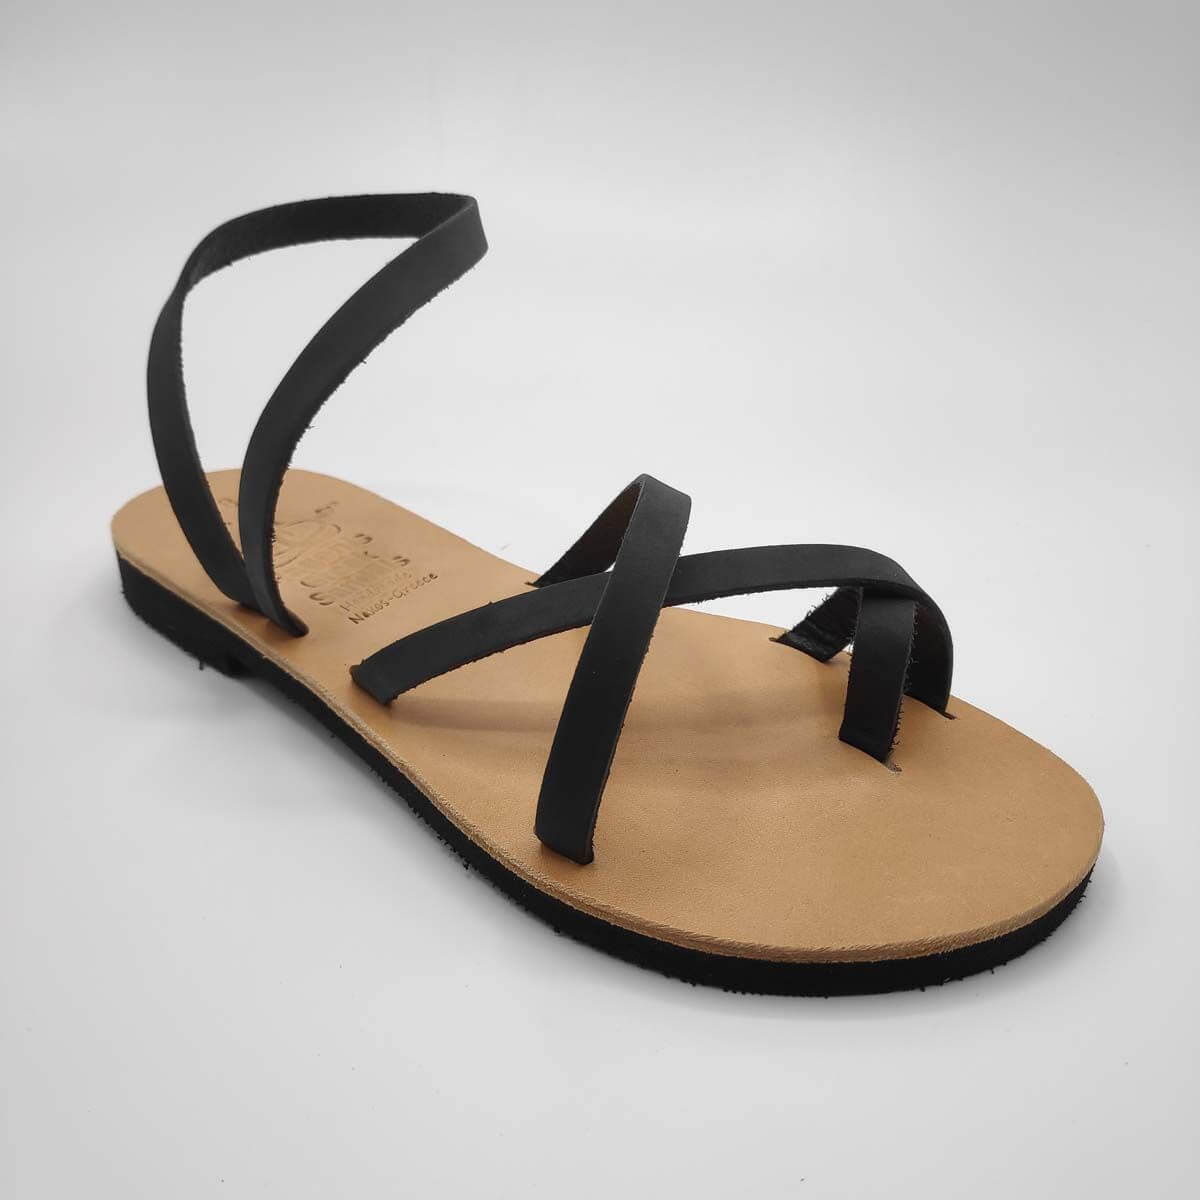 Black Leather Strappy Sandals with Toe Straps | Antiparos | Pagonis Greek Sandals